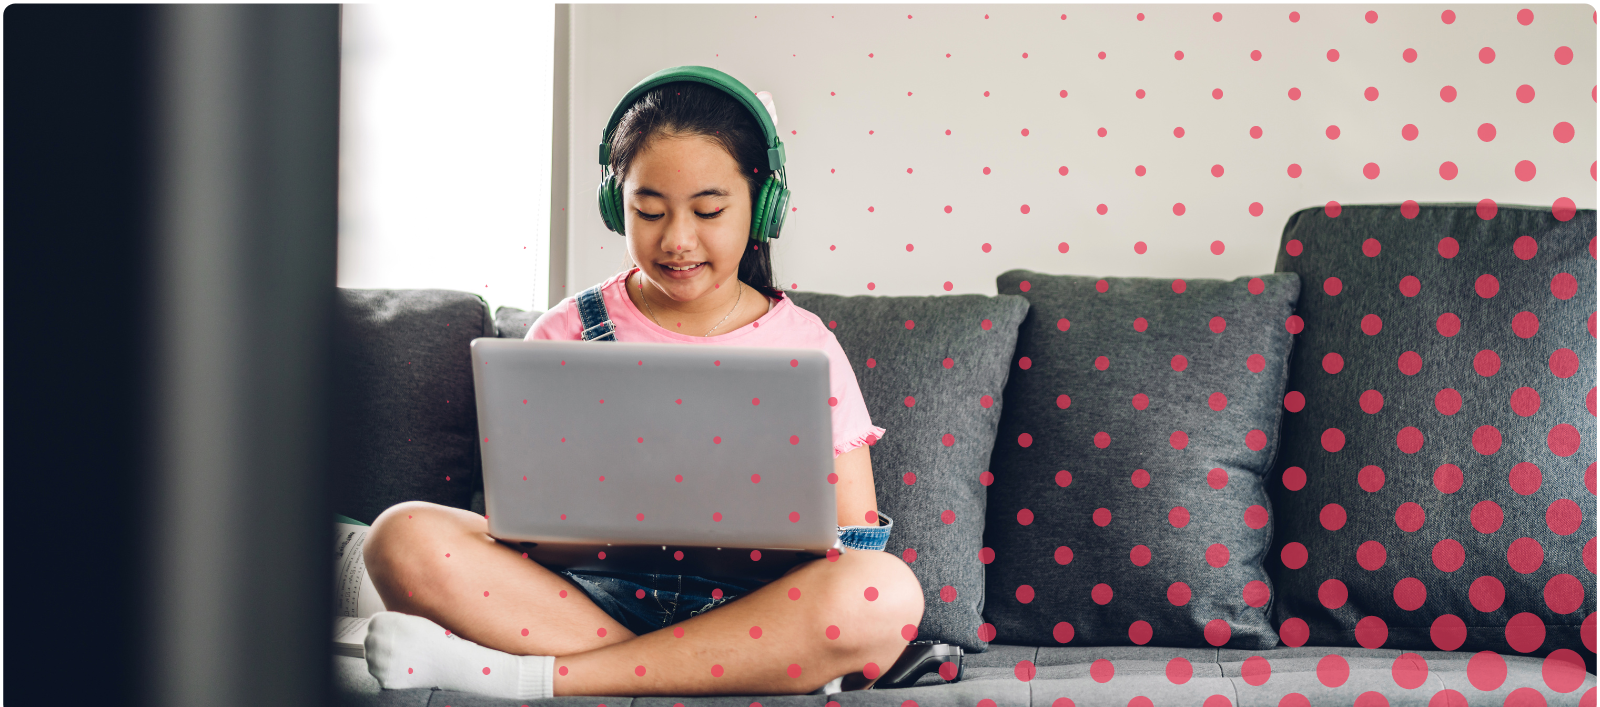 Child sitting on a couch with a laptop on their lap and green headphones on